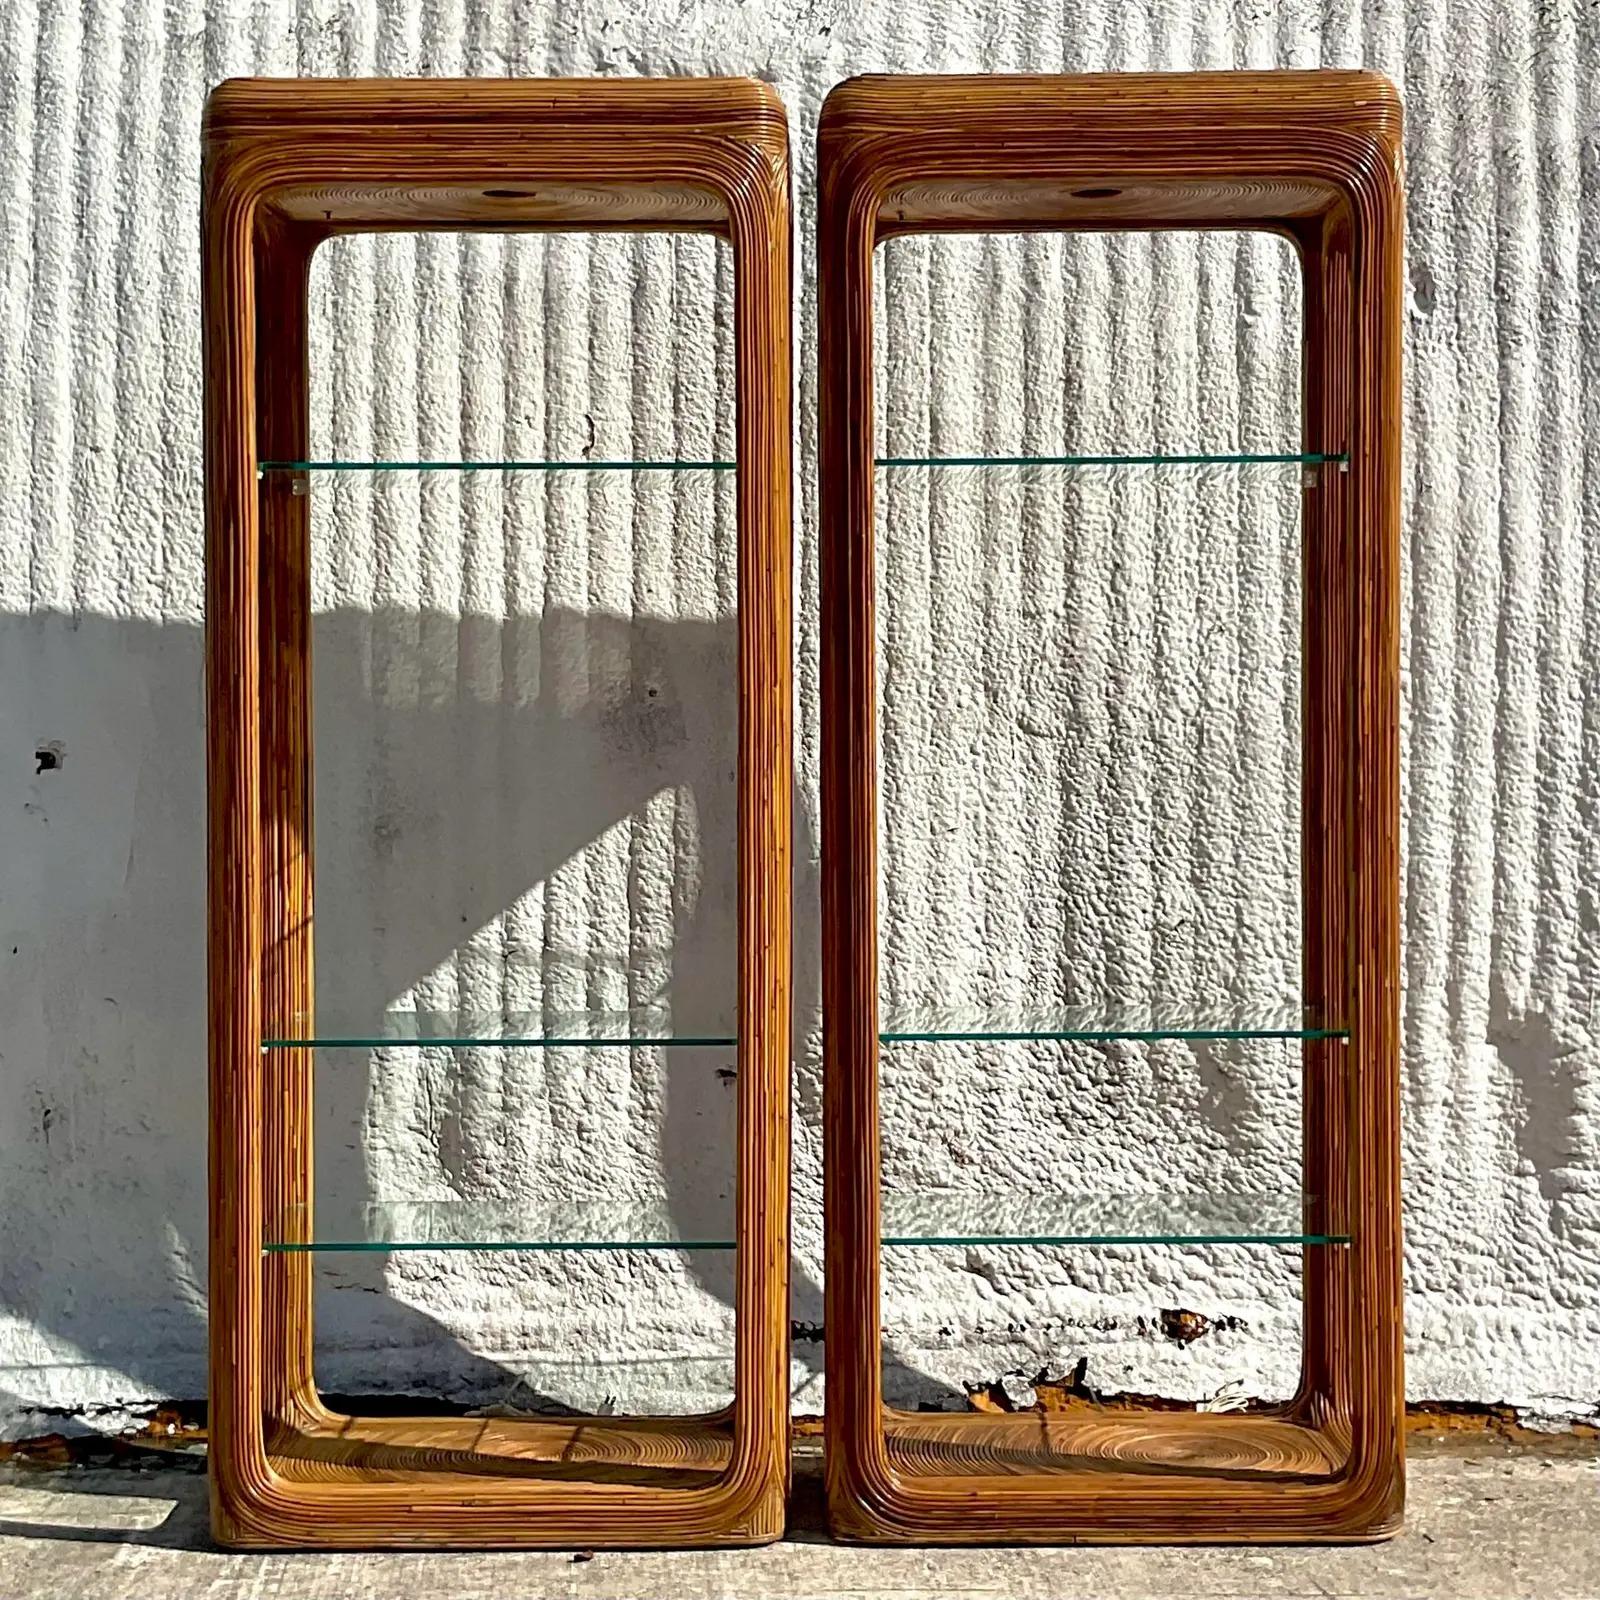 A fabulous pair of vintage Coastal etagere. Beautiful pencil reed frame with the coveted starburst design. Inset glass shelves. Acquired from a Palm Beach estate.